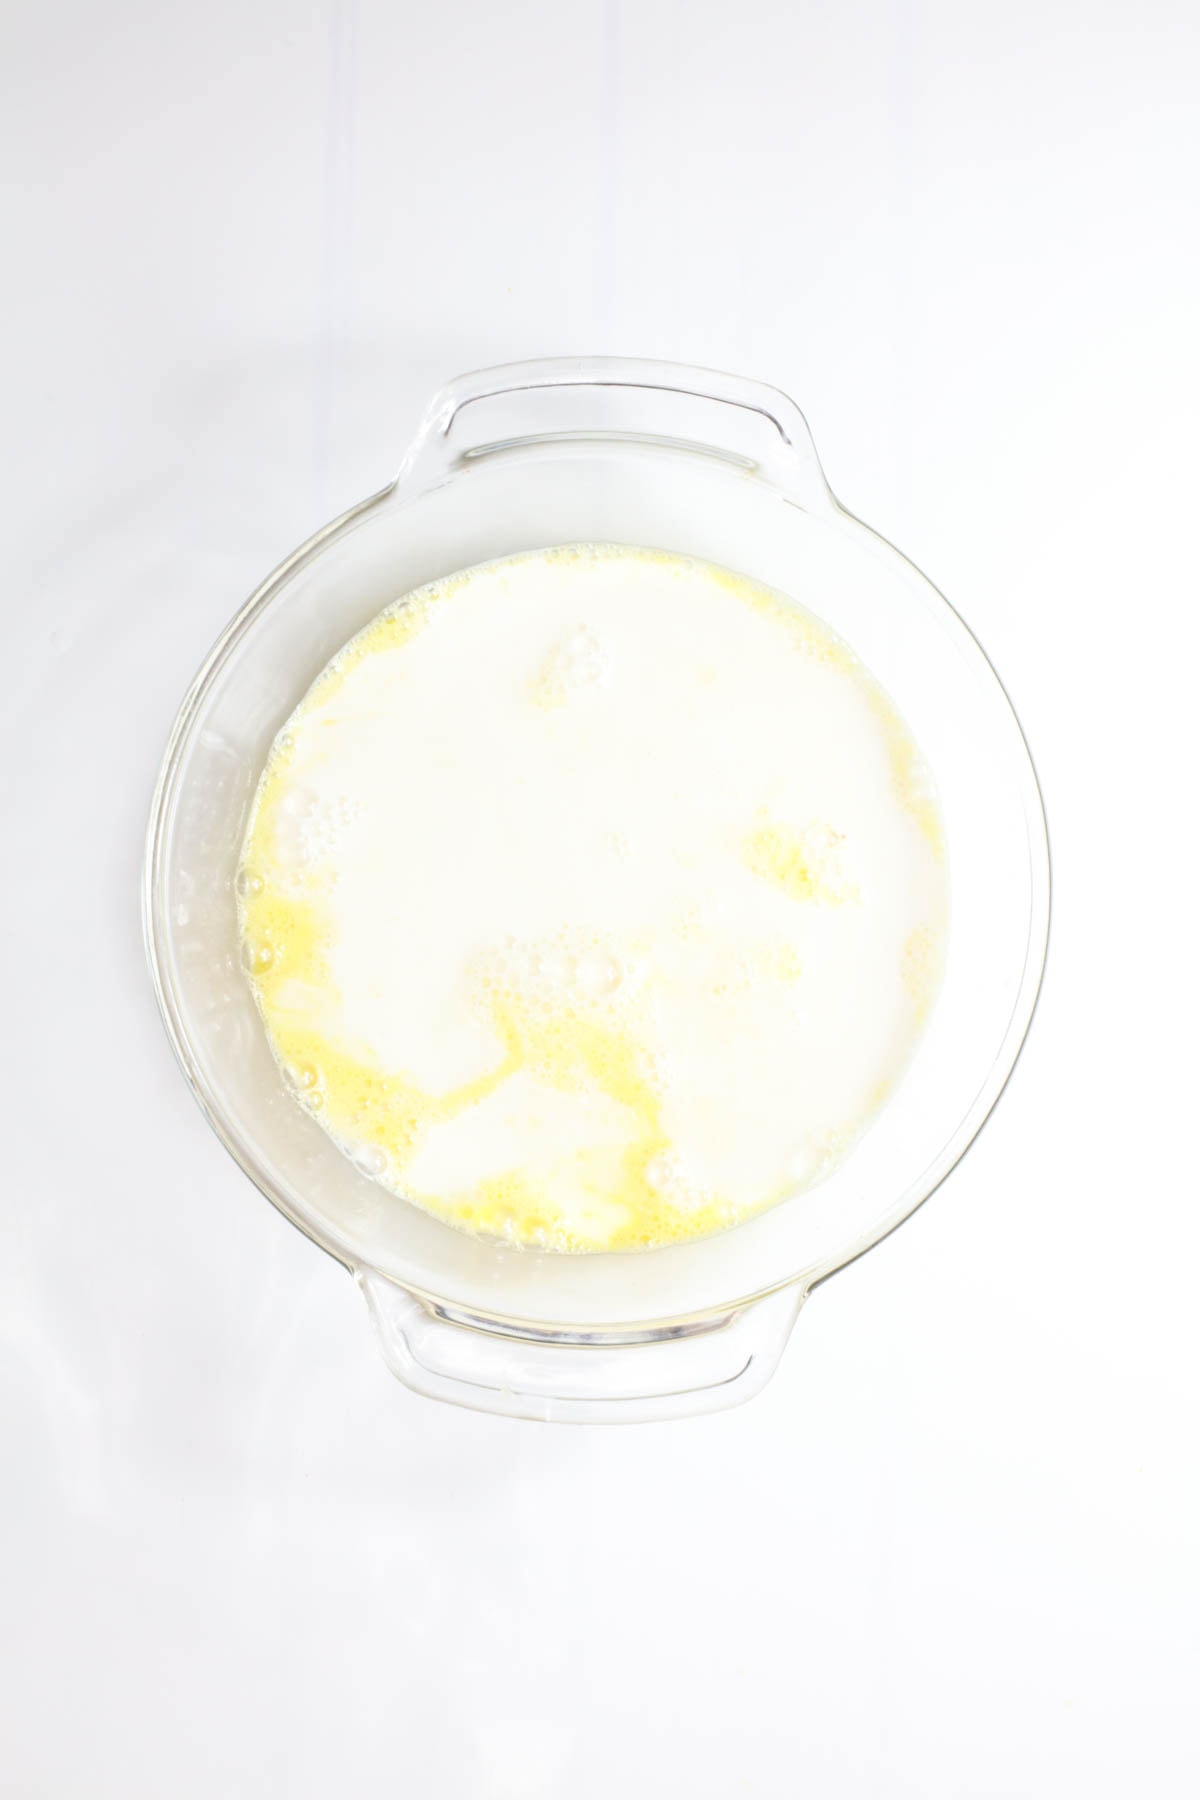 Egg mixture with milk in bowl